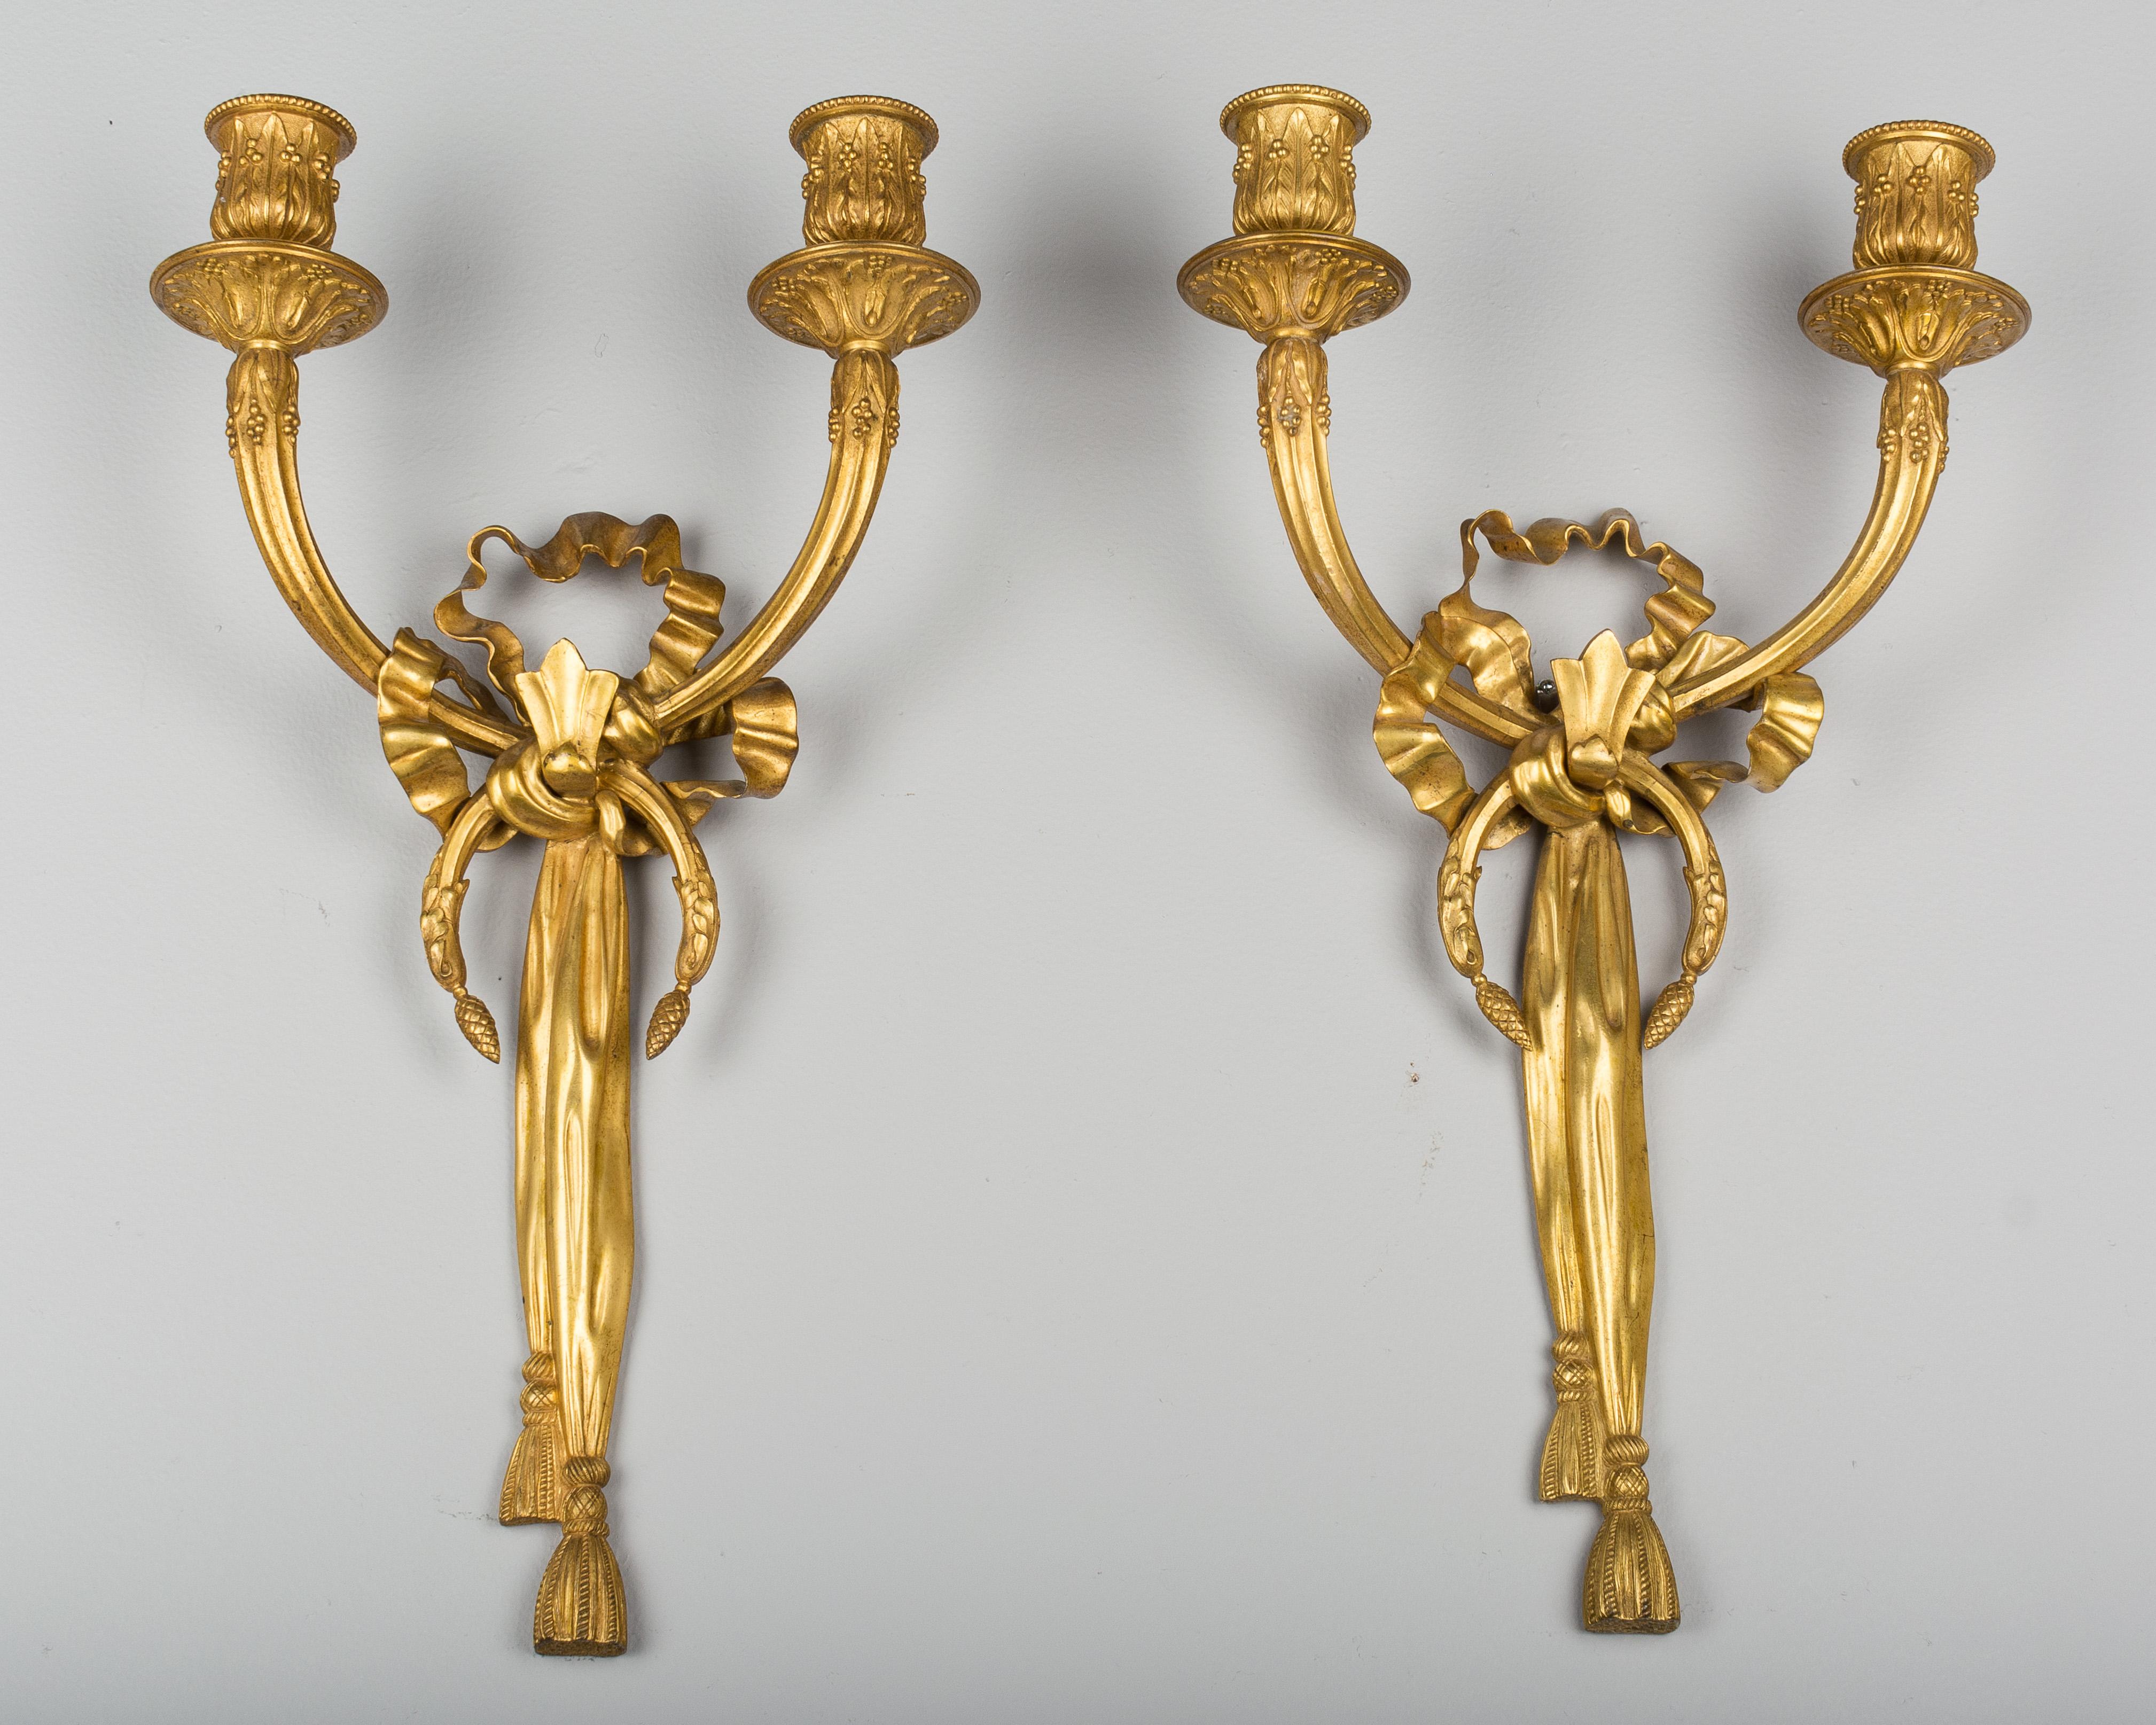 Cast Pair of Louis XV Style French Sconces